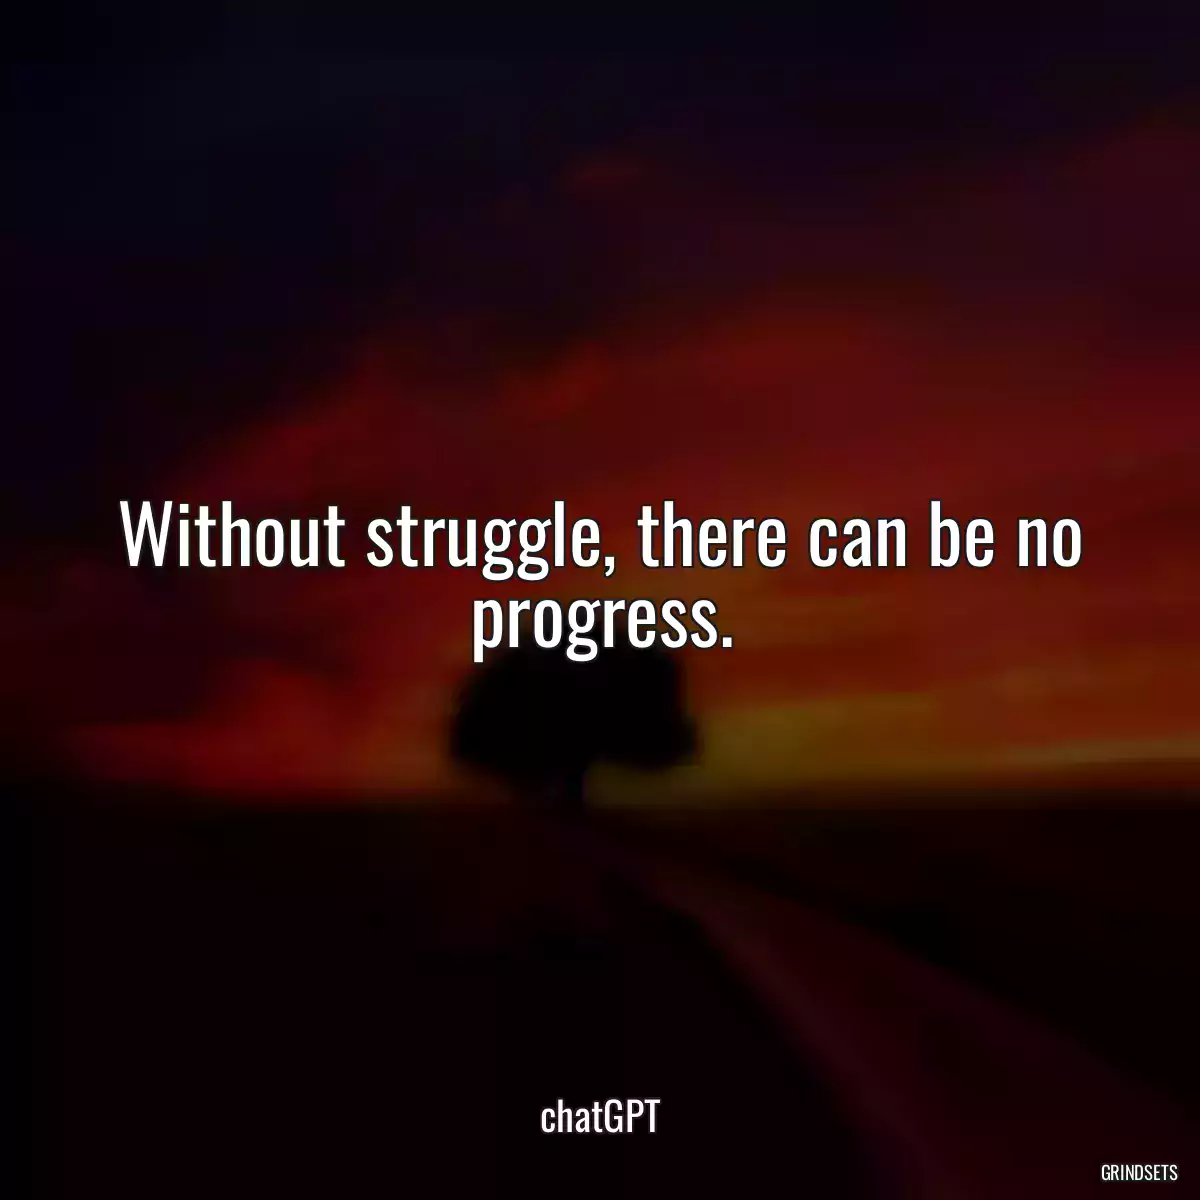 Without struggle, there can be no progress.